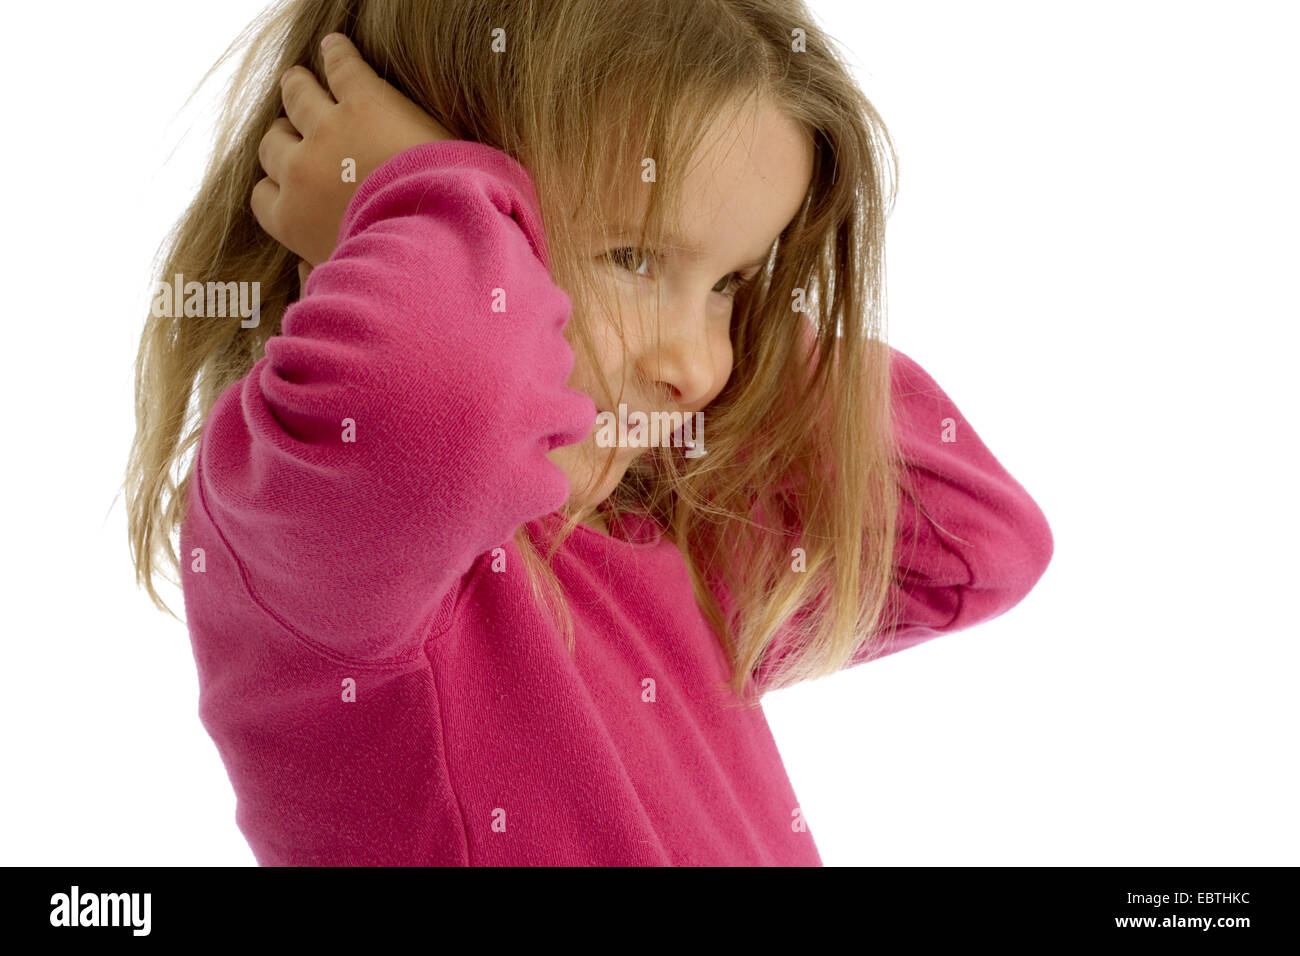 little girl holding her ears shut with a smile Stock Photo